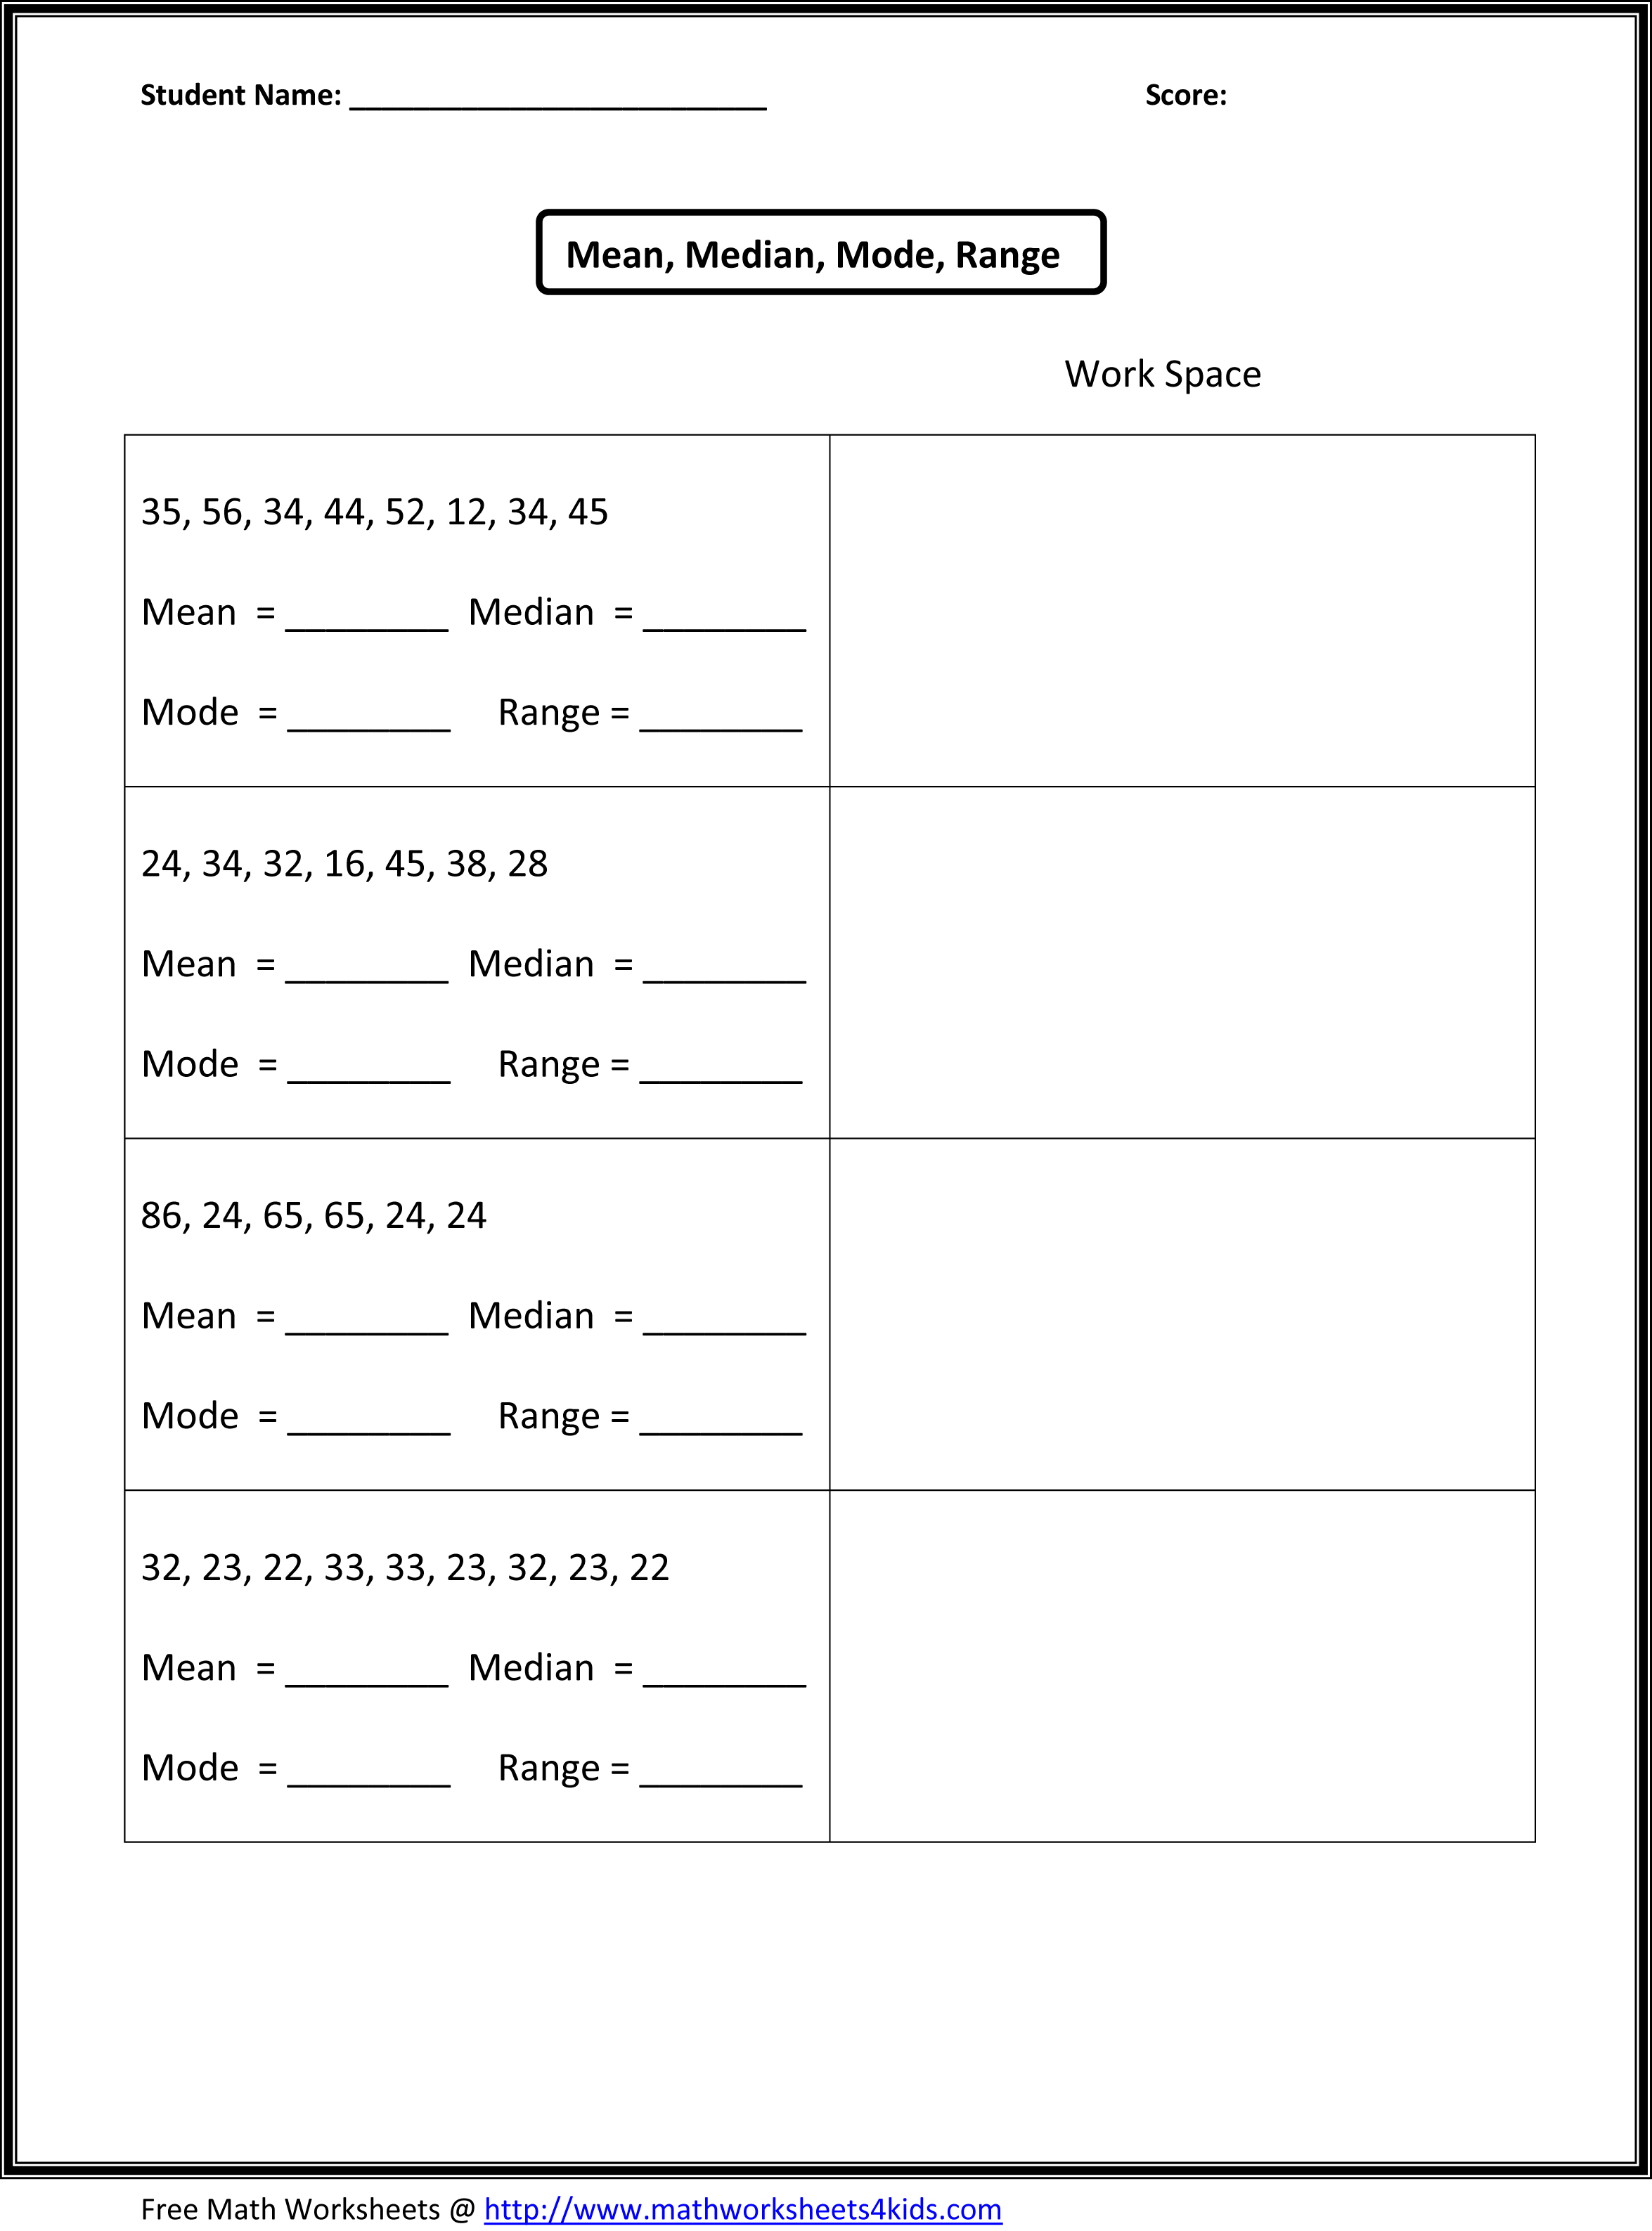 15 Best Images of GCF Worksheets With Answers - Greatest ...